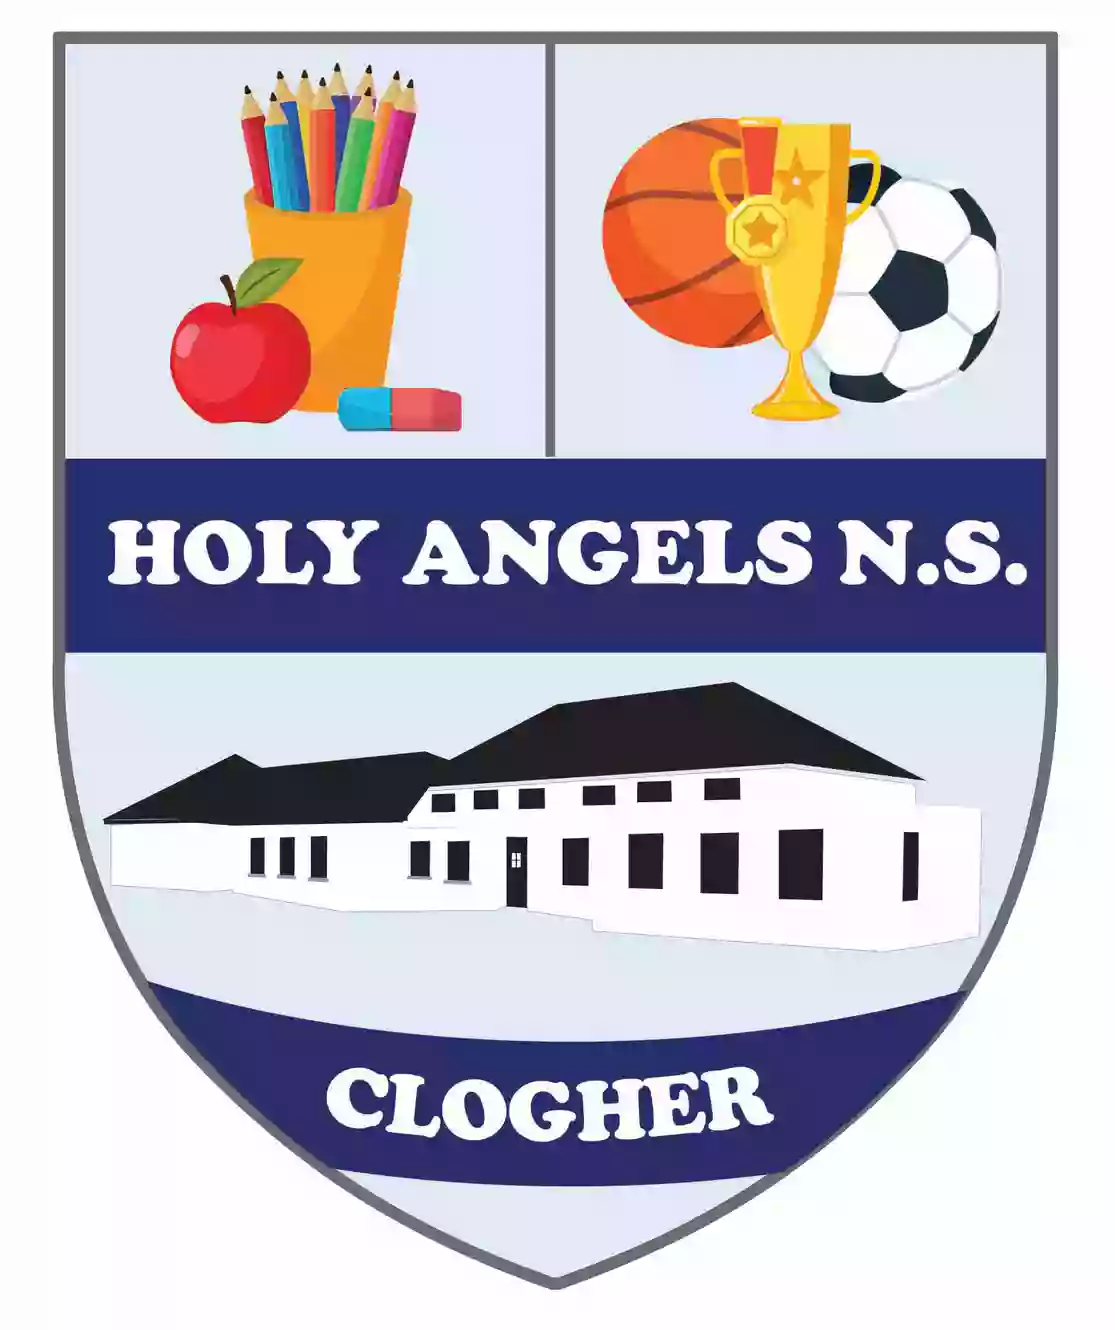 Clogher National School